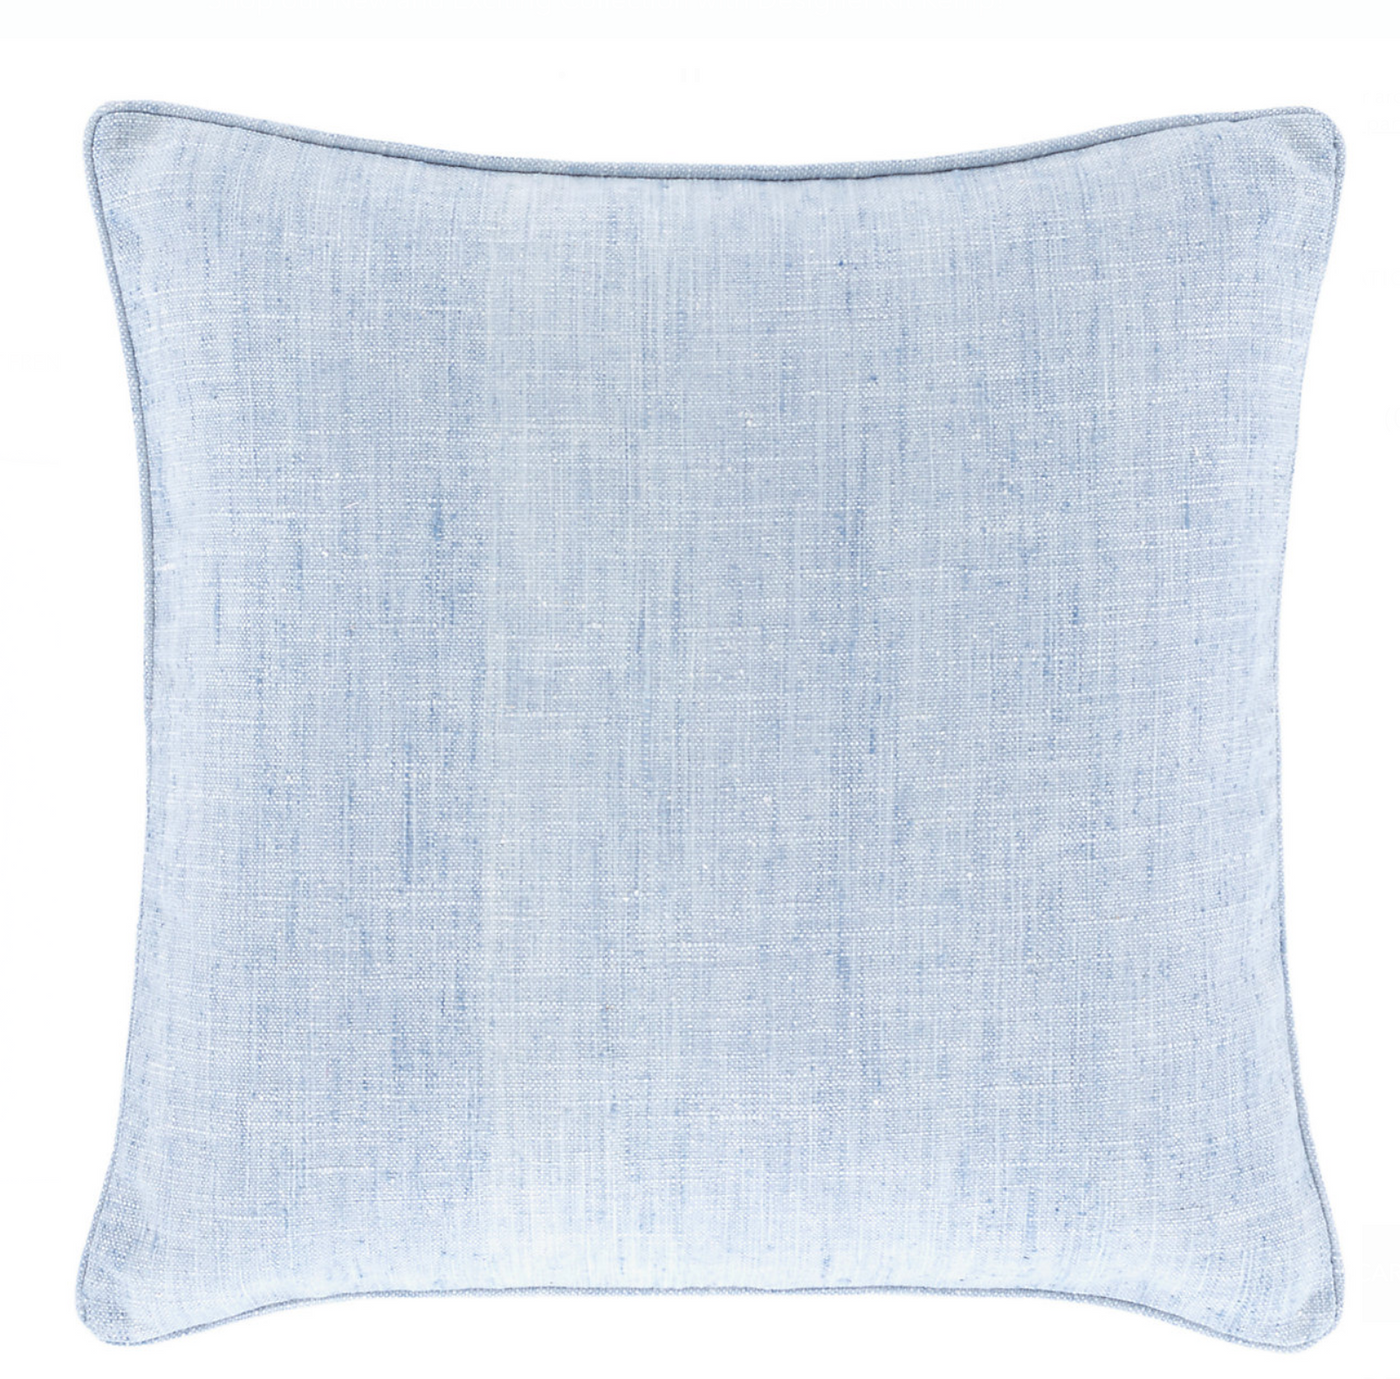 PILLOW DECORATIVE INDOOR/OUTDOOR (Available in 2 Colors)